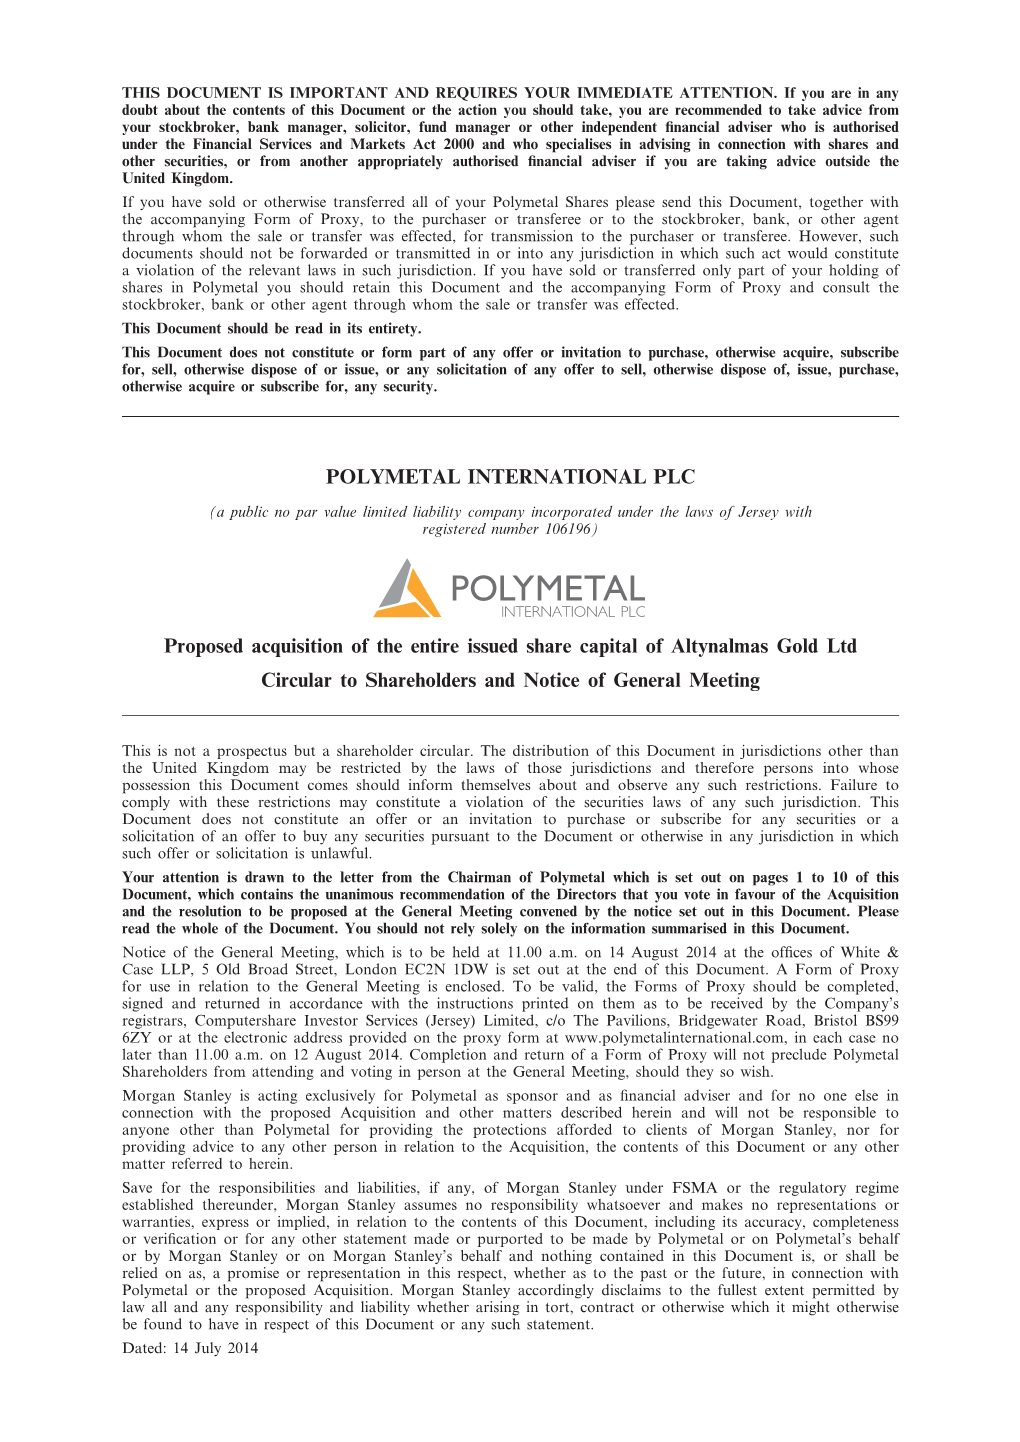 POLYMETAL INTERNATIONAL PLC Proposed Acquisition of the Entire